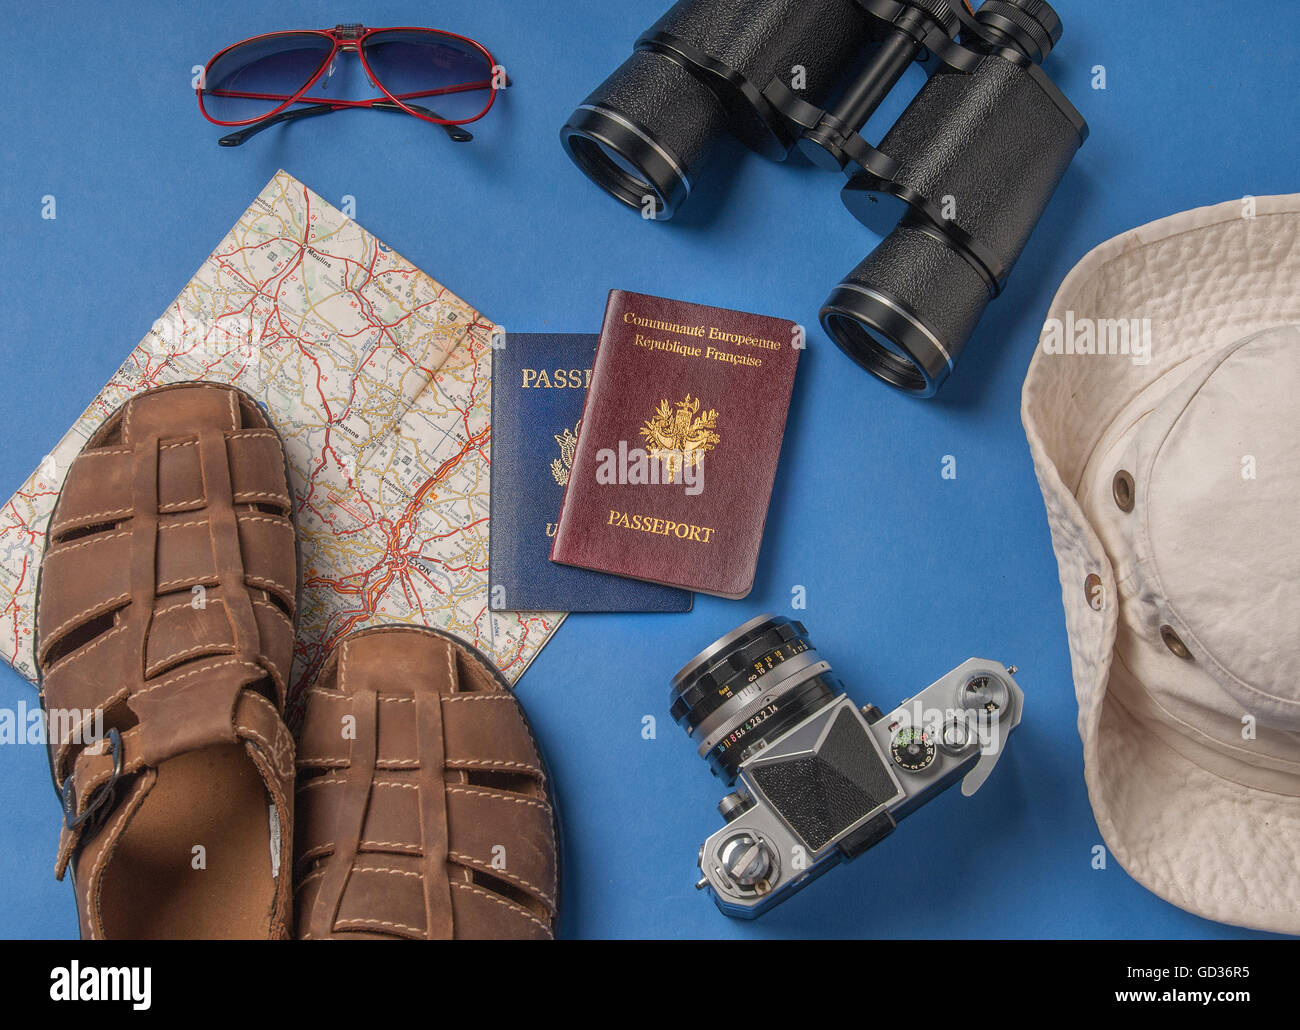 Travel vacation objects on a blue background Stock Photo